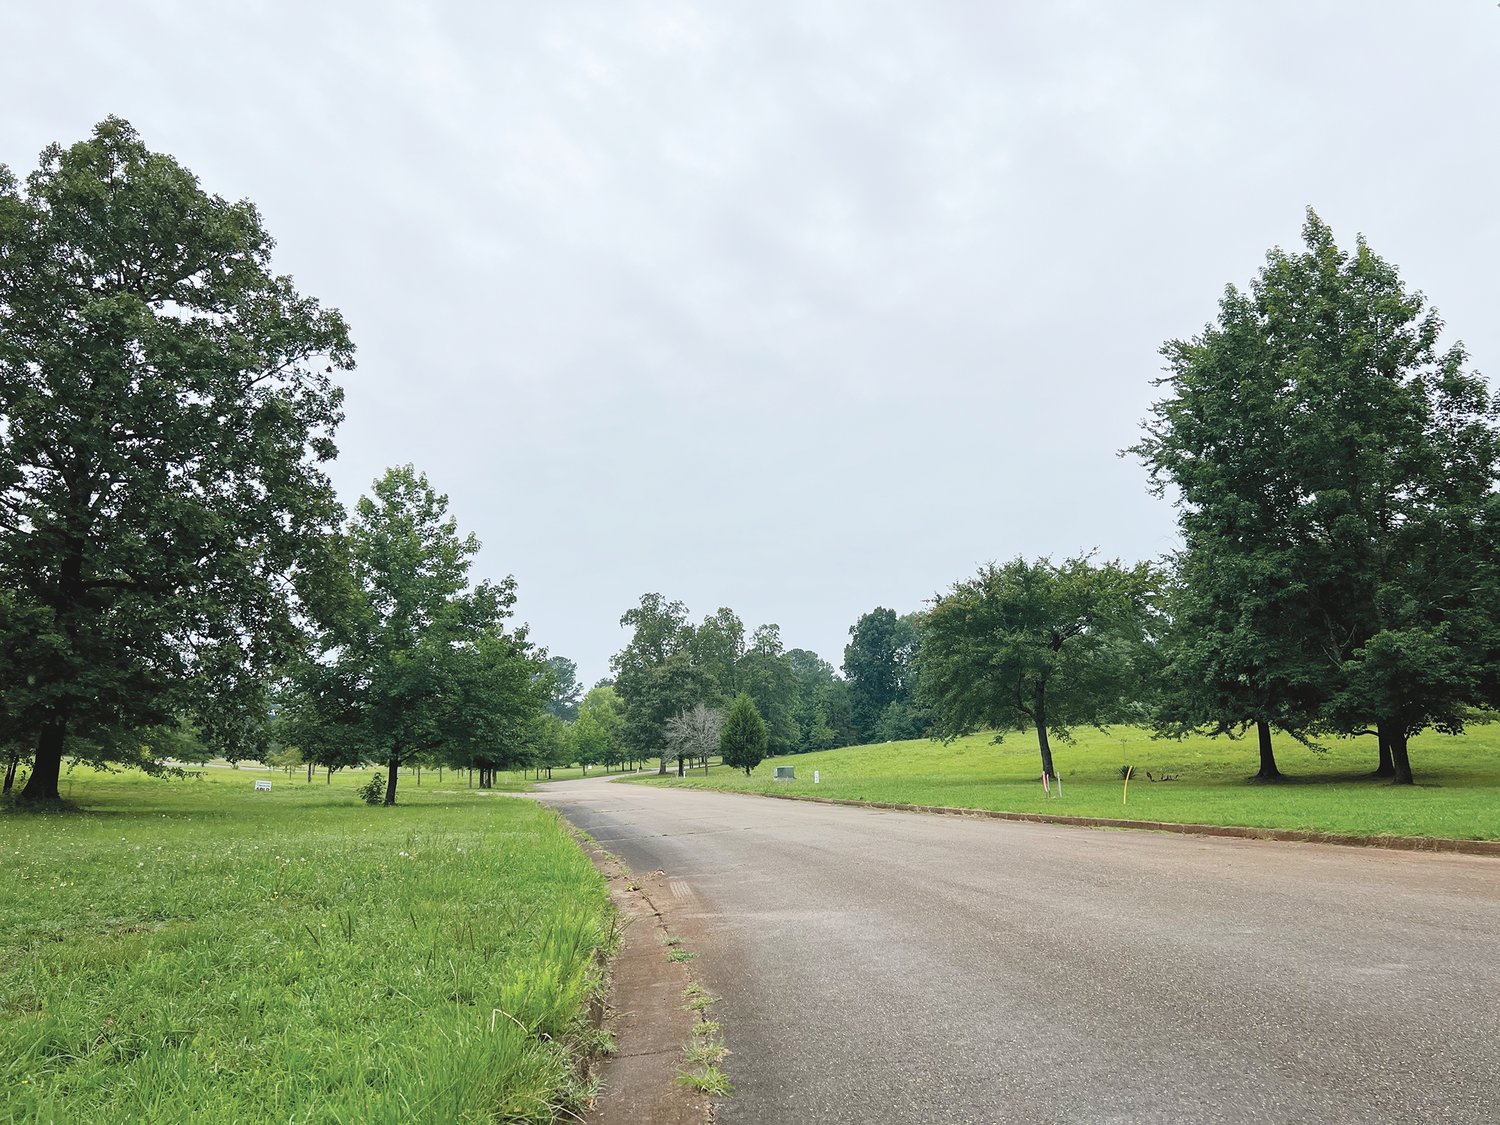 Lots in a quiet part of town with mature trees, city utilities and infrastructure are features of the now open Deer Park subdivision.